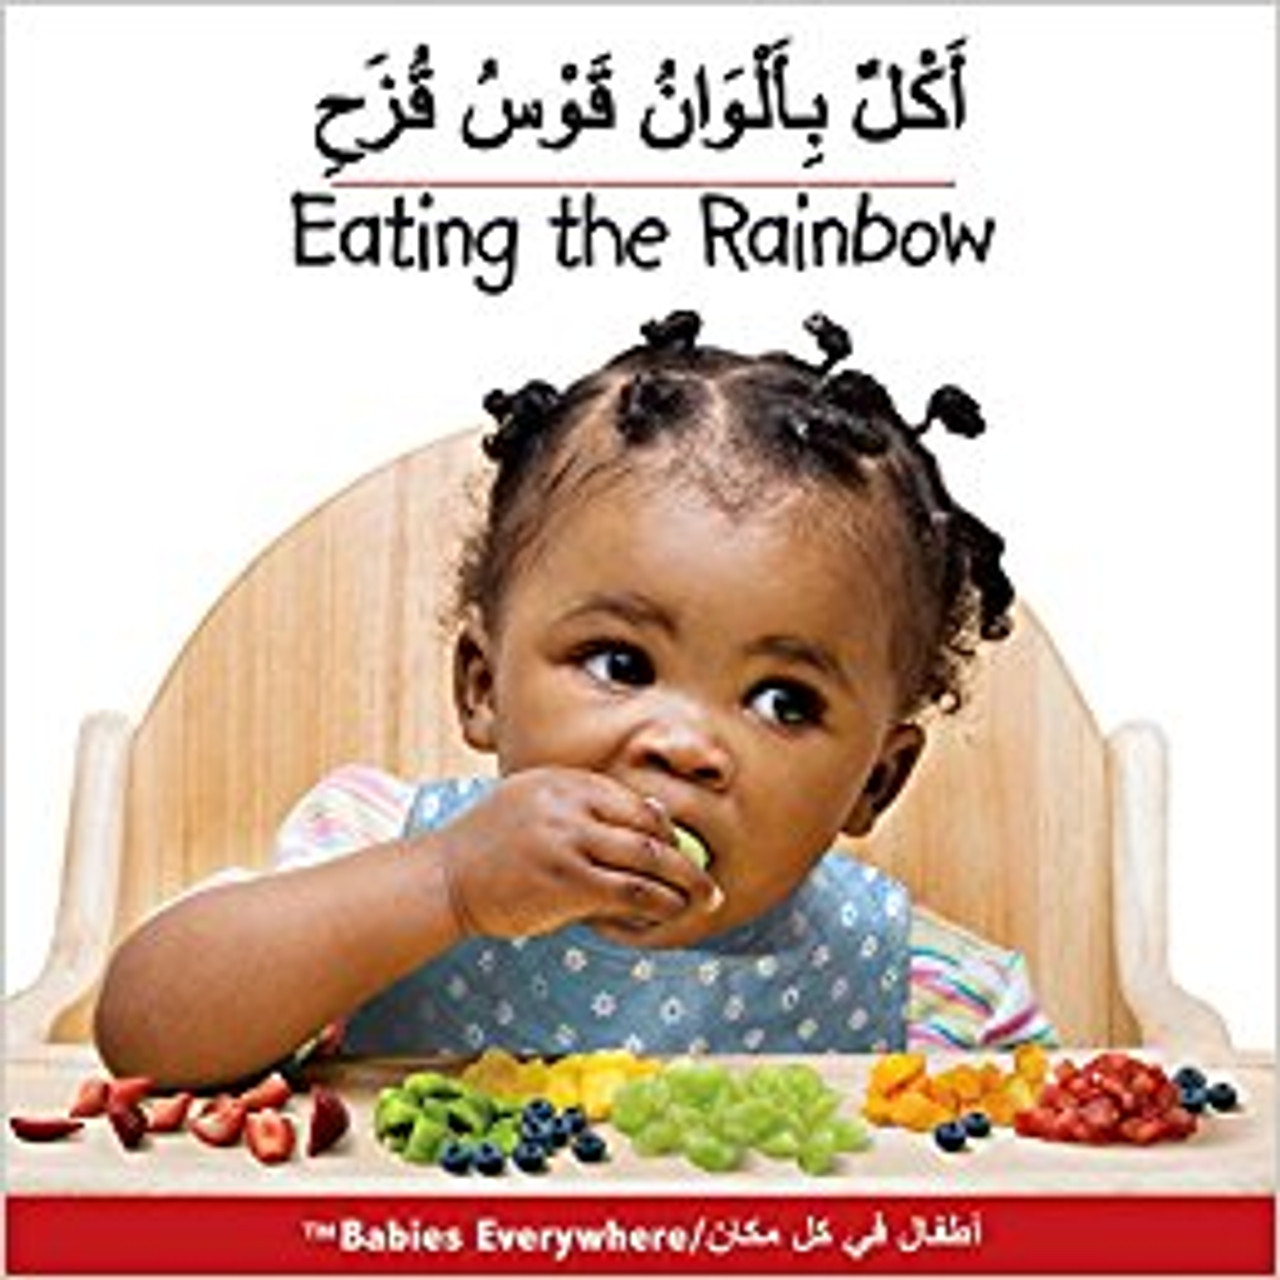 Eating the Rainbow by Star Bright Books